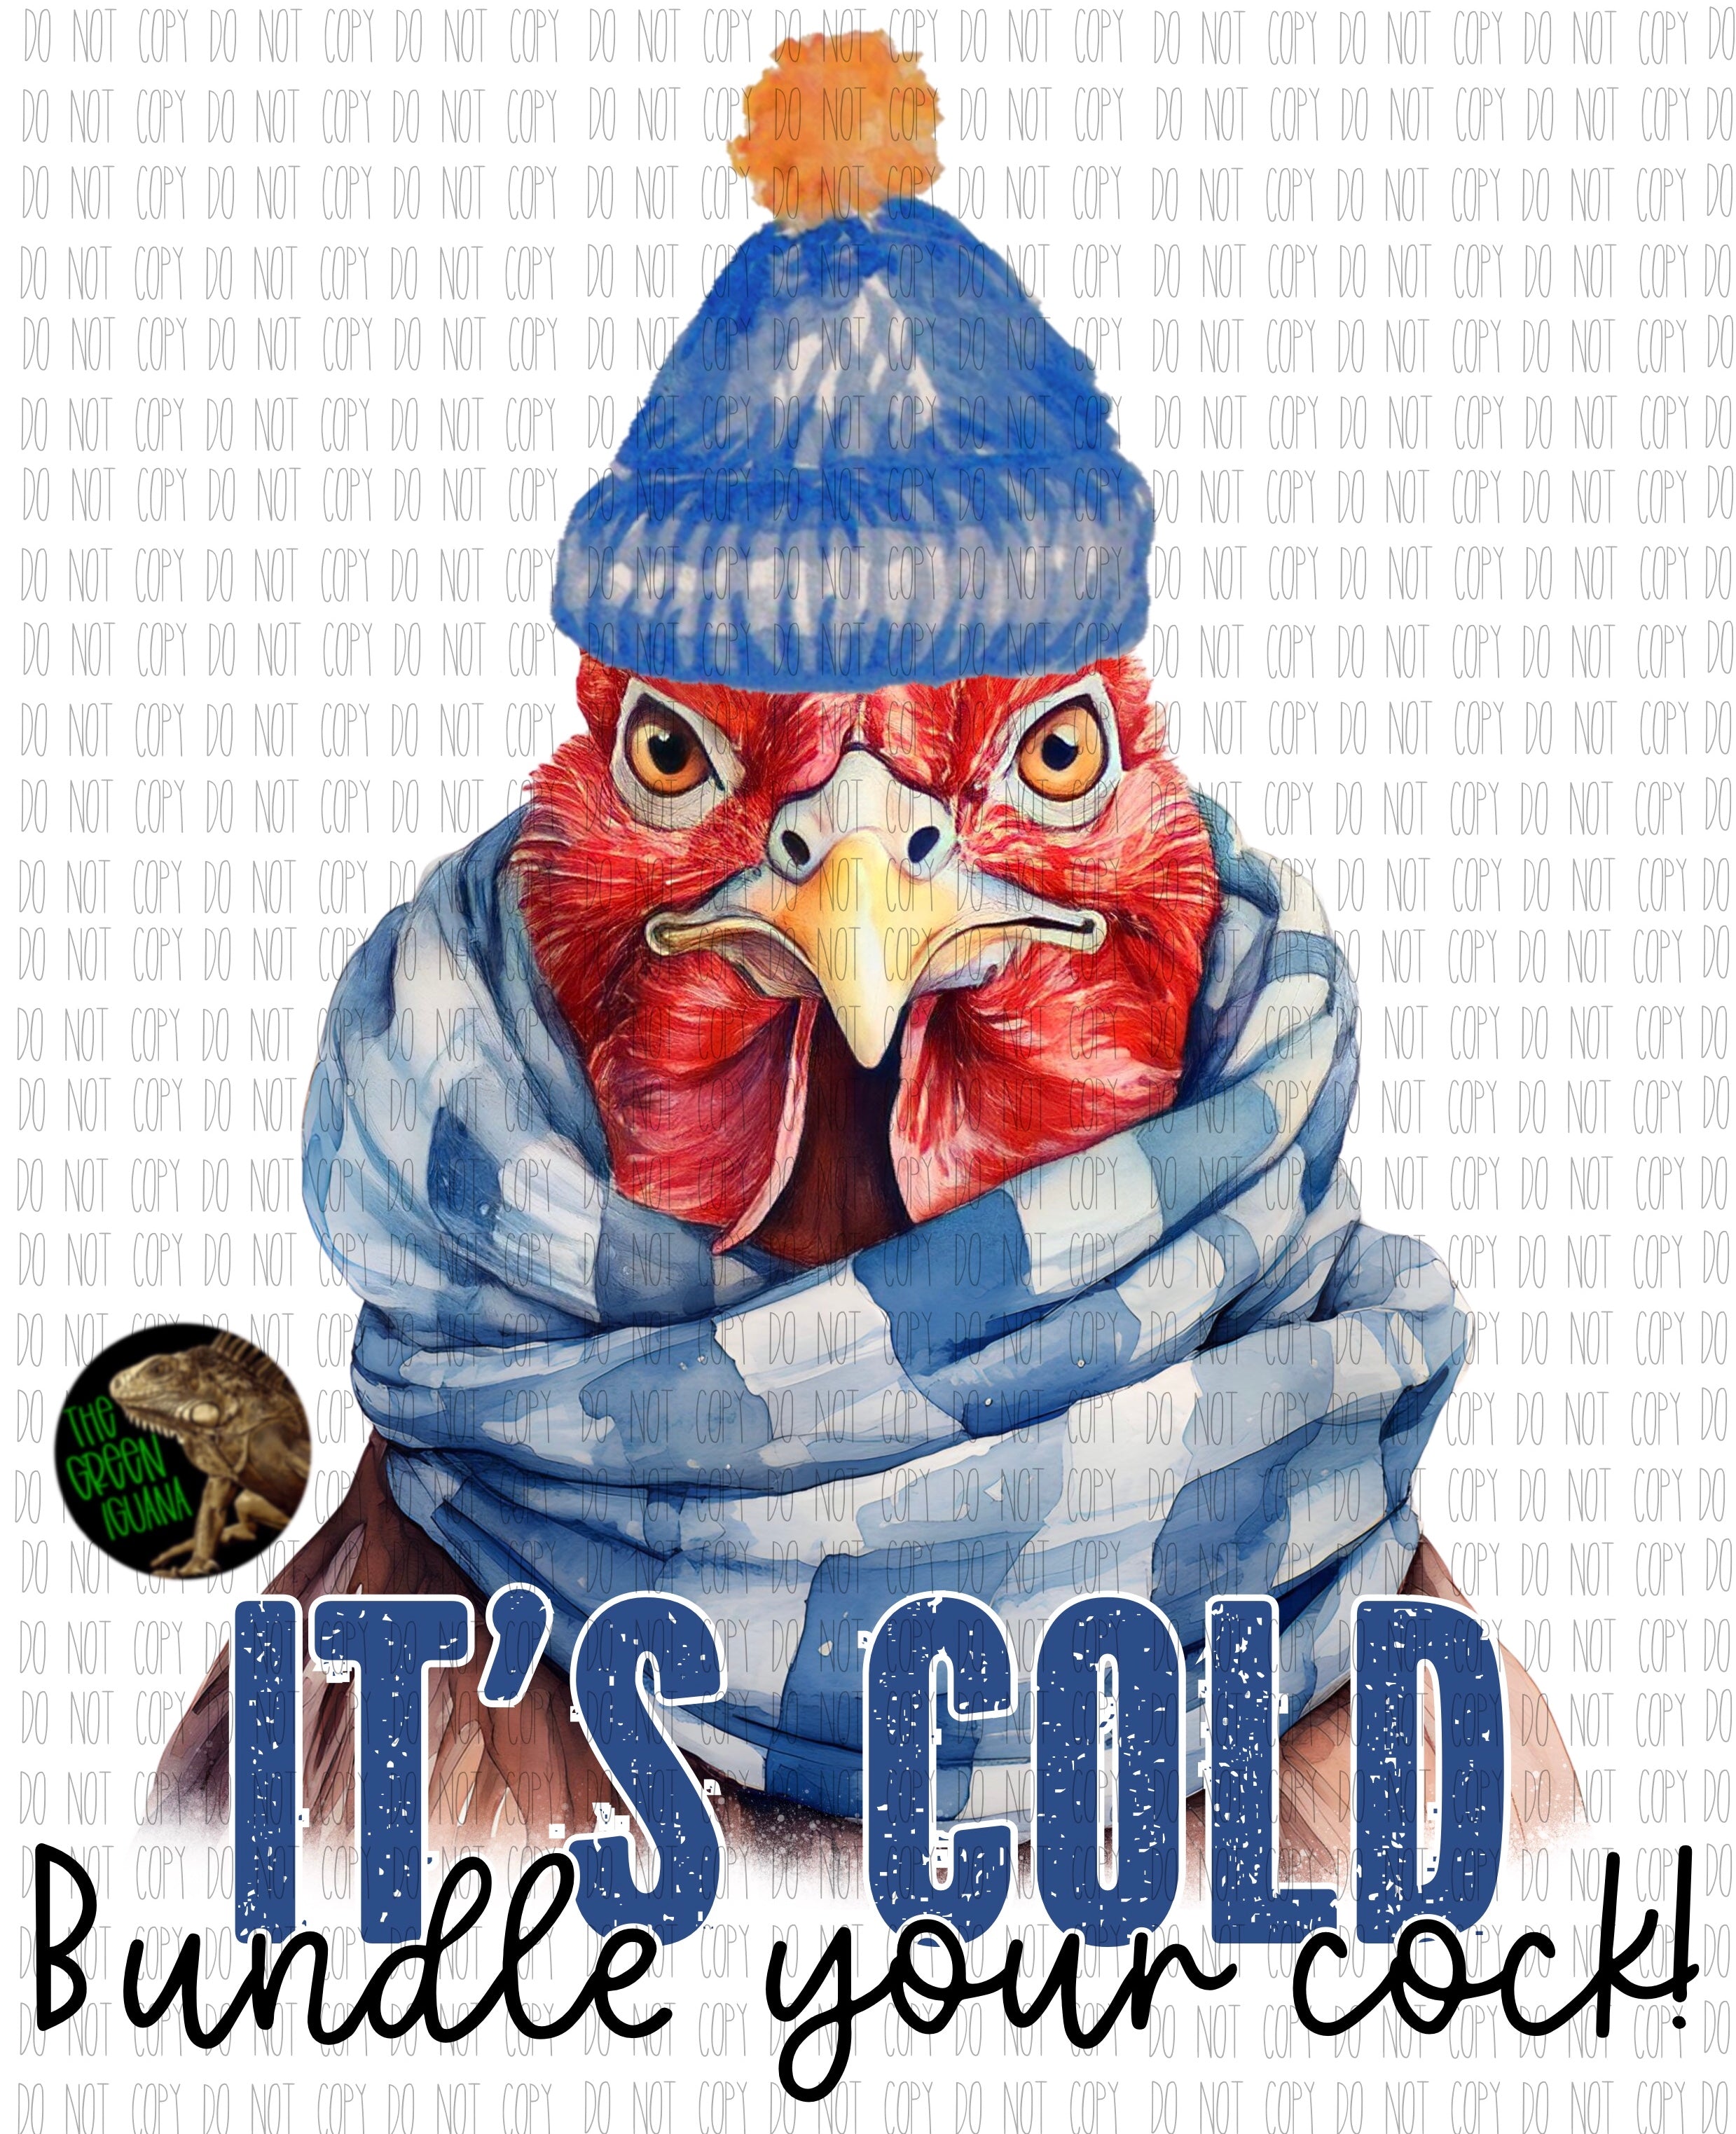 It’s cold. Bundle your cock! - DTF transfer